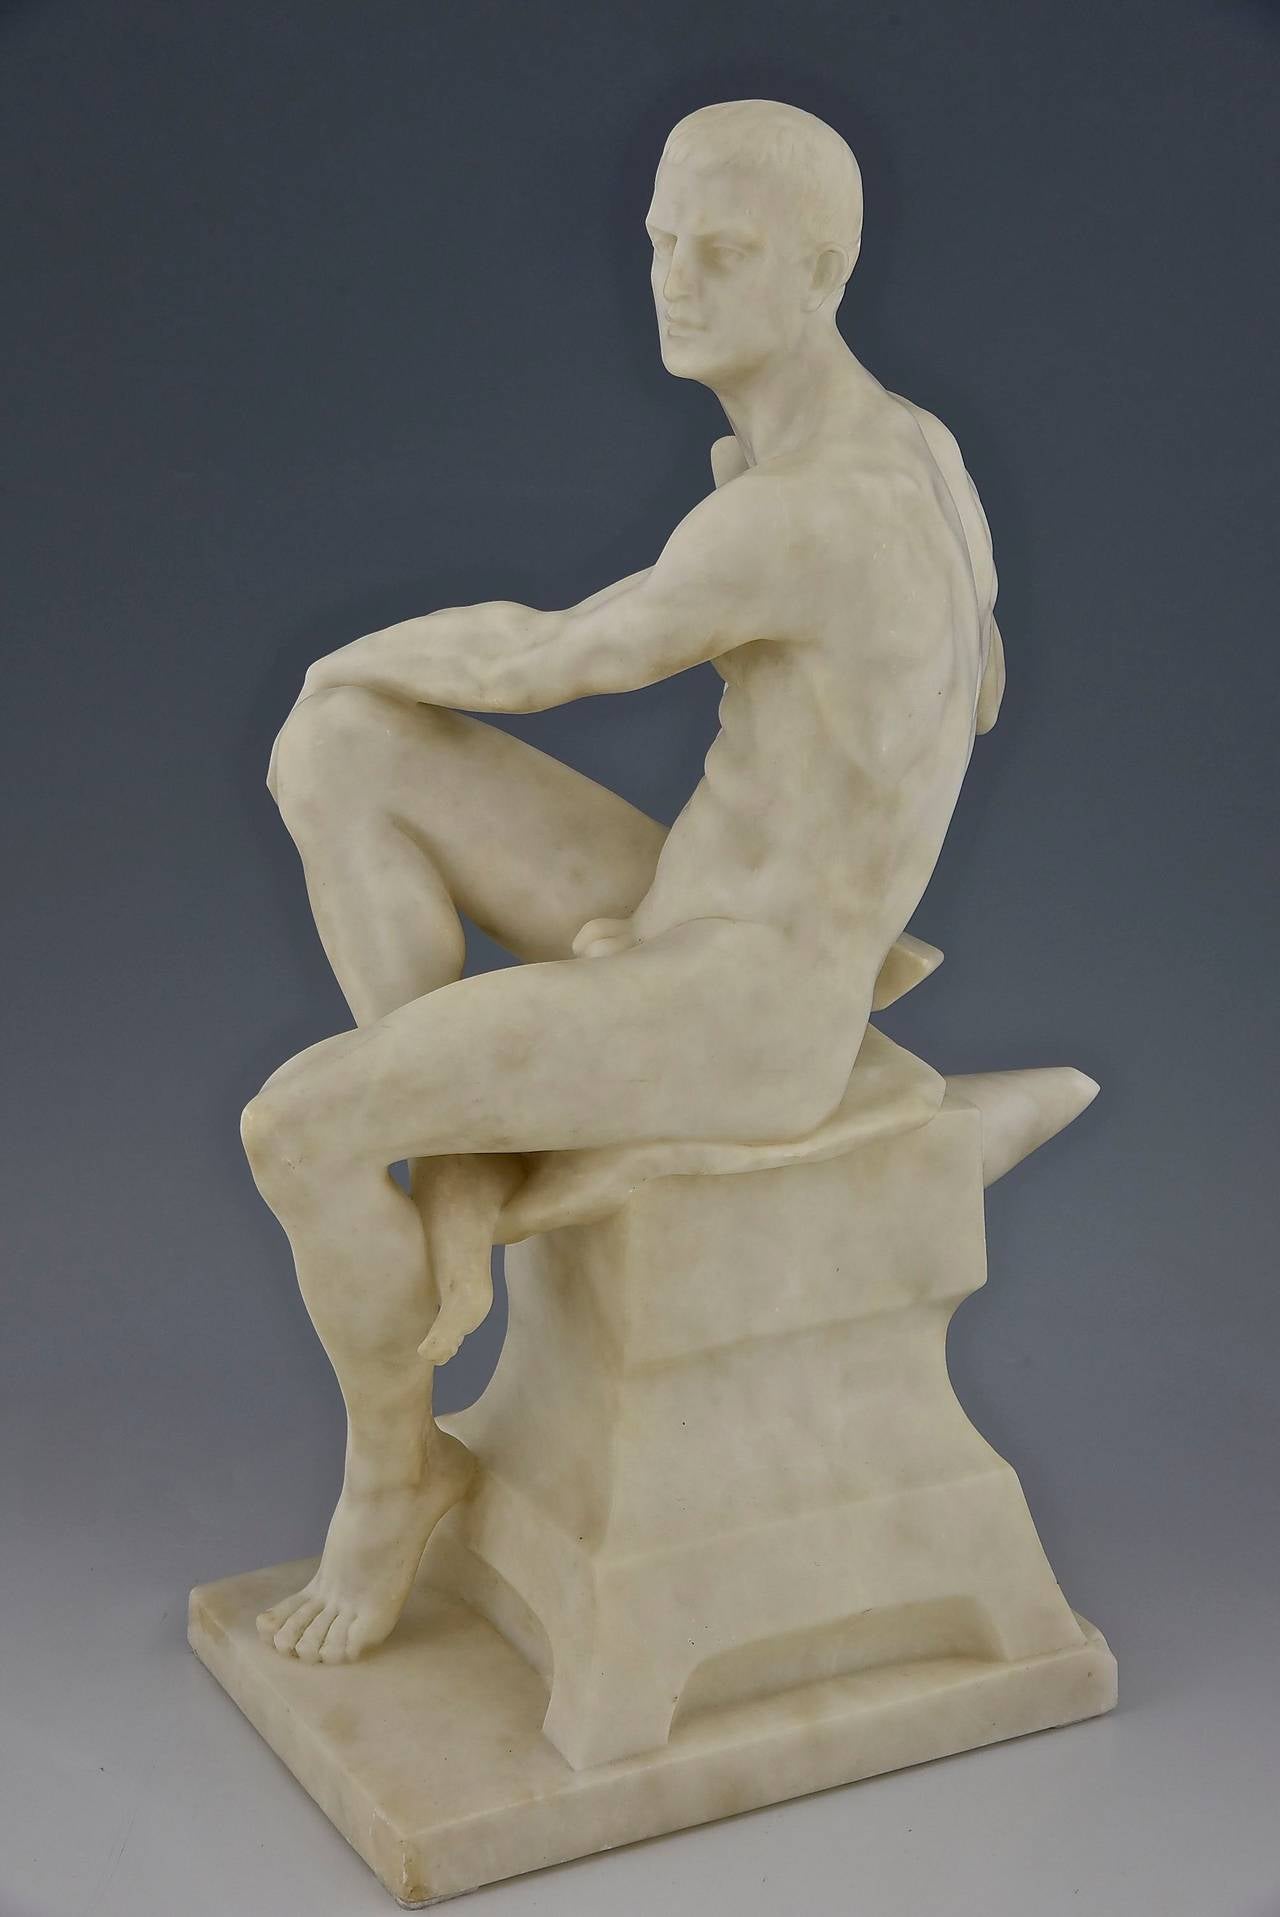 Antique marble sculpture of a seated male nude with a hammer sitting on an anvil.
By Franz Iffland.
Signature and marks:  Fec. Iffland. 
Style: Romantic. 
Date:  1890. 
Material: White marble. 
Origin:  Germany. 
Size:  
H 19.3 inch x L 11.4